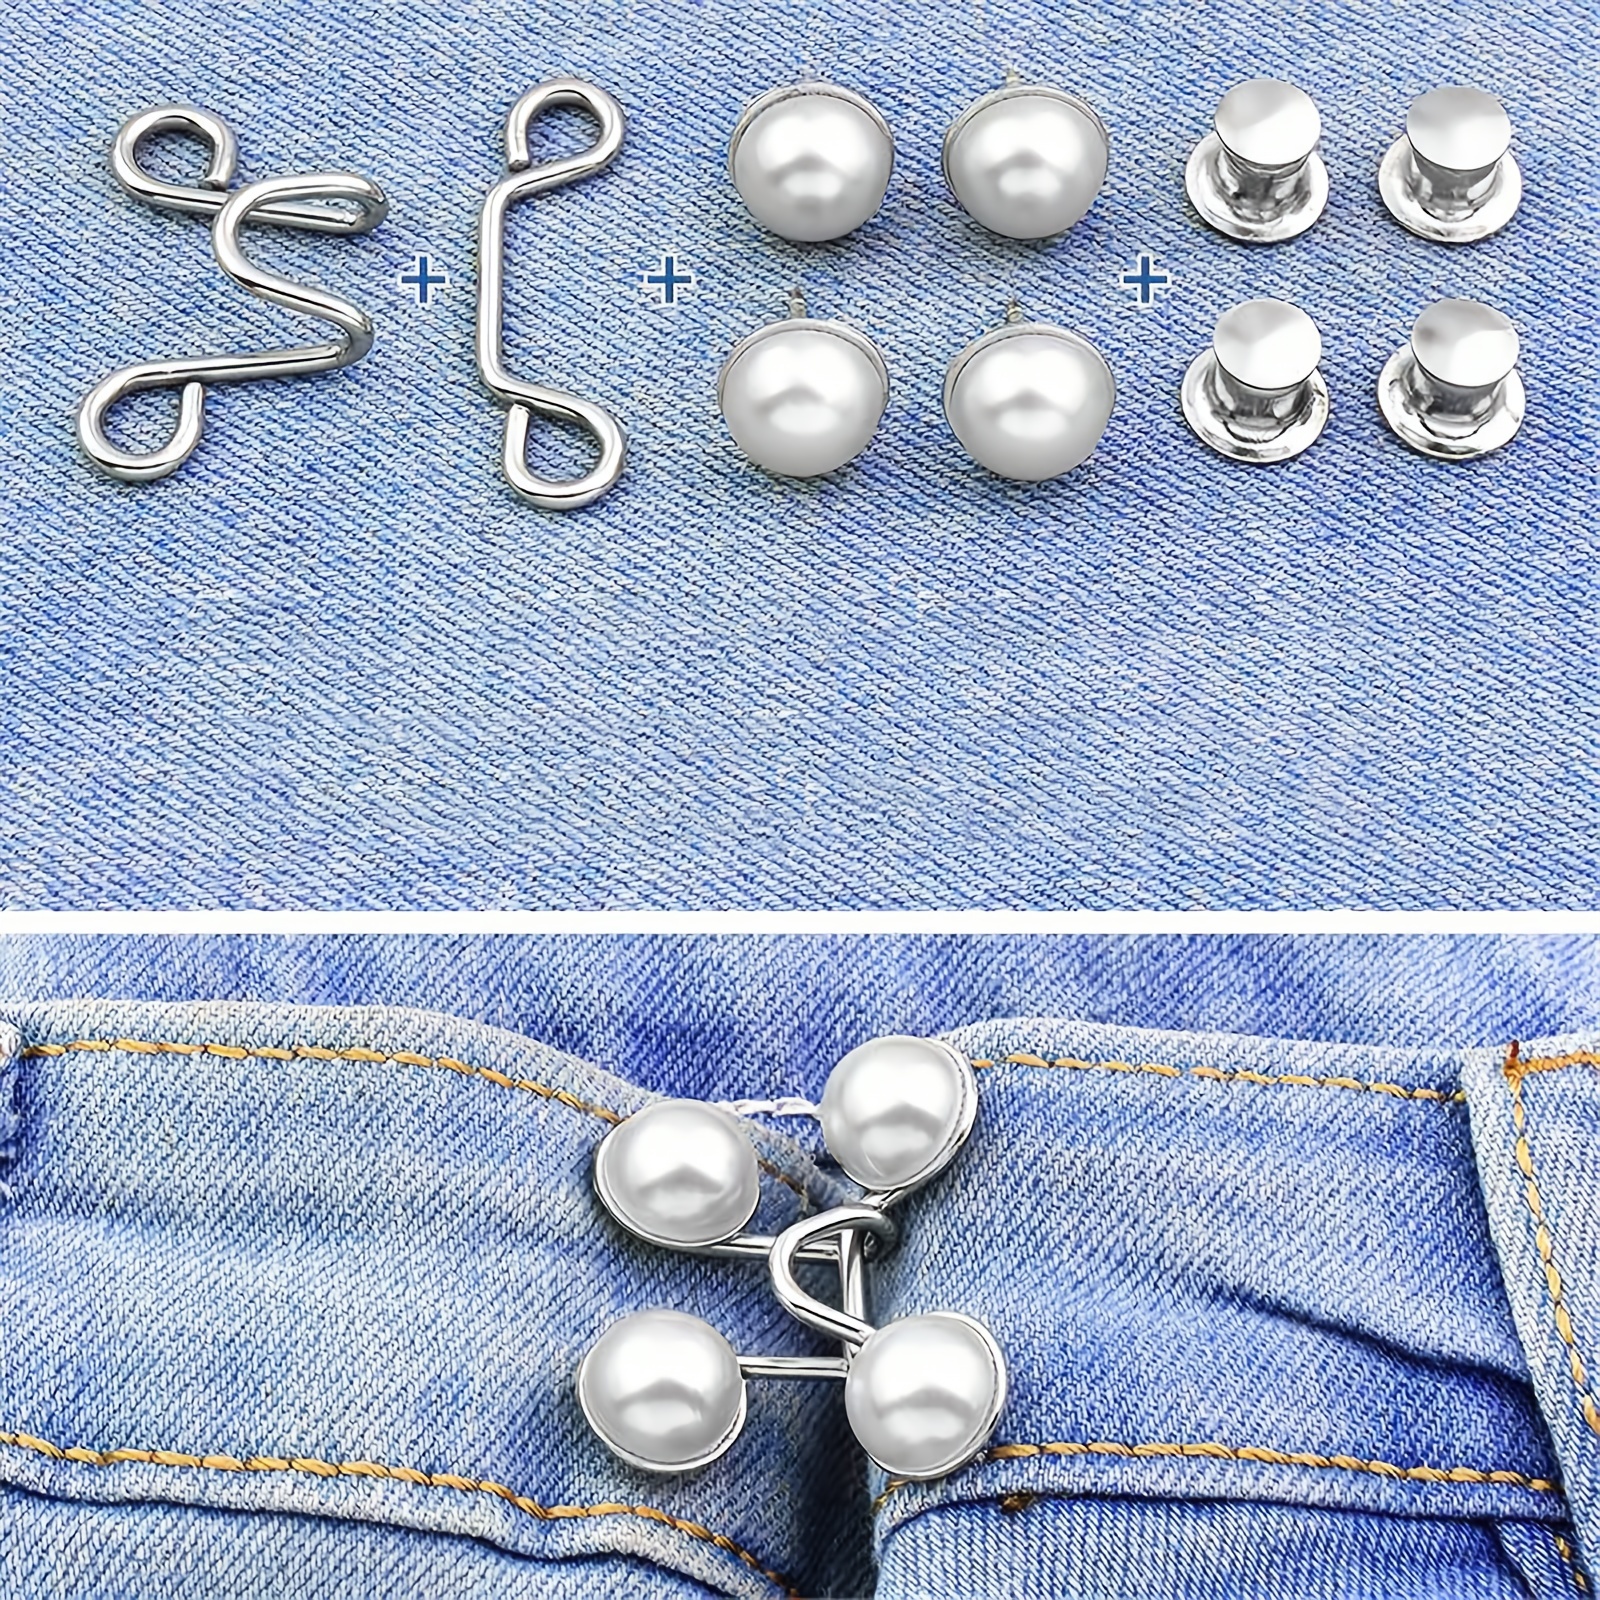 COHEALI Buttons for Jeans to Make Smaller Nail-Free Tightener Buttons for  Pants Jean Button Waist Buckle Waist Butterfly Buttons Jeans Button